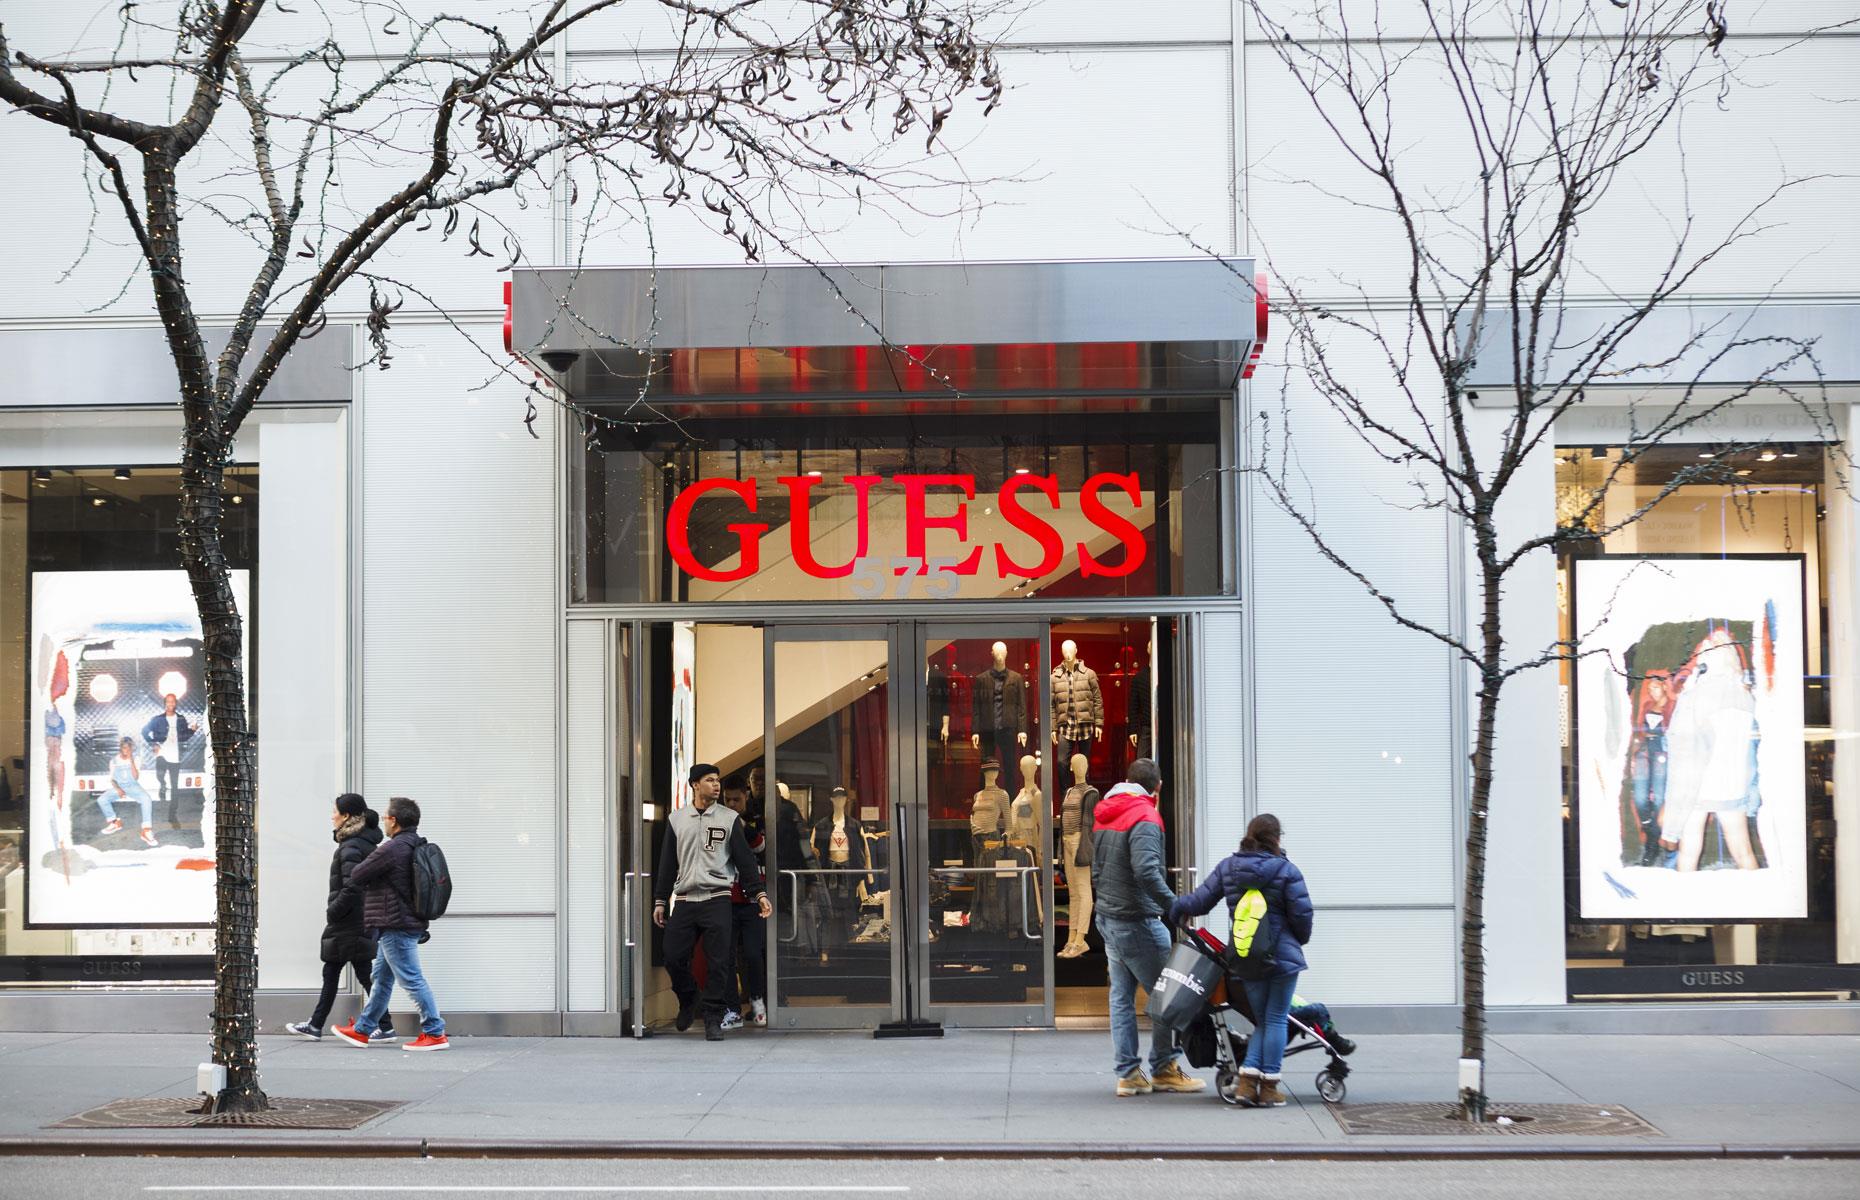 Guess: up to 120 stores